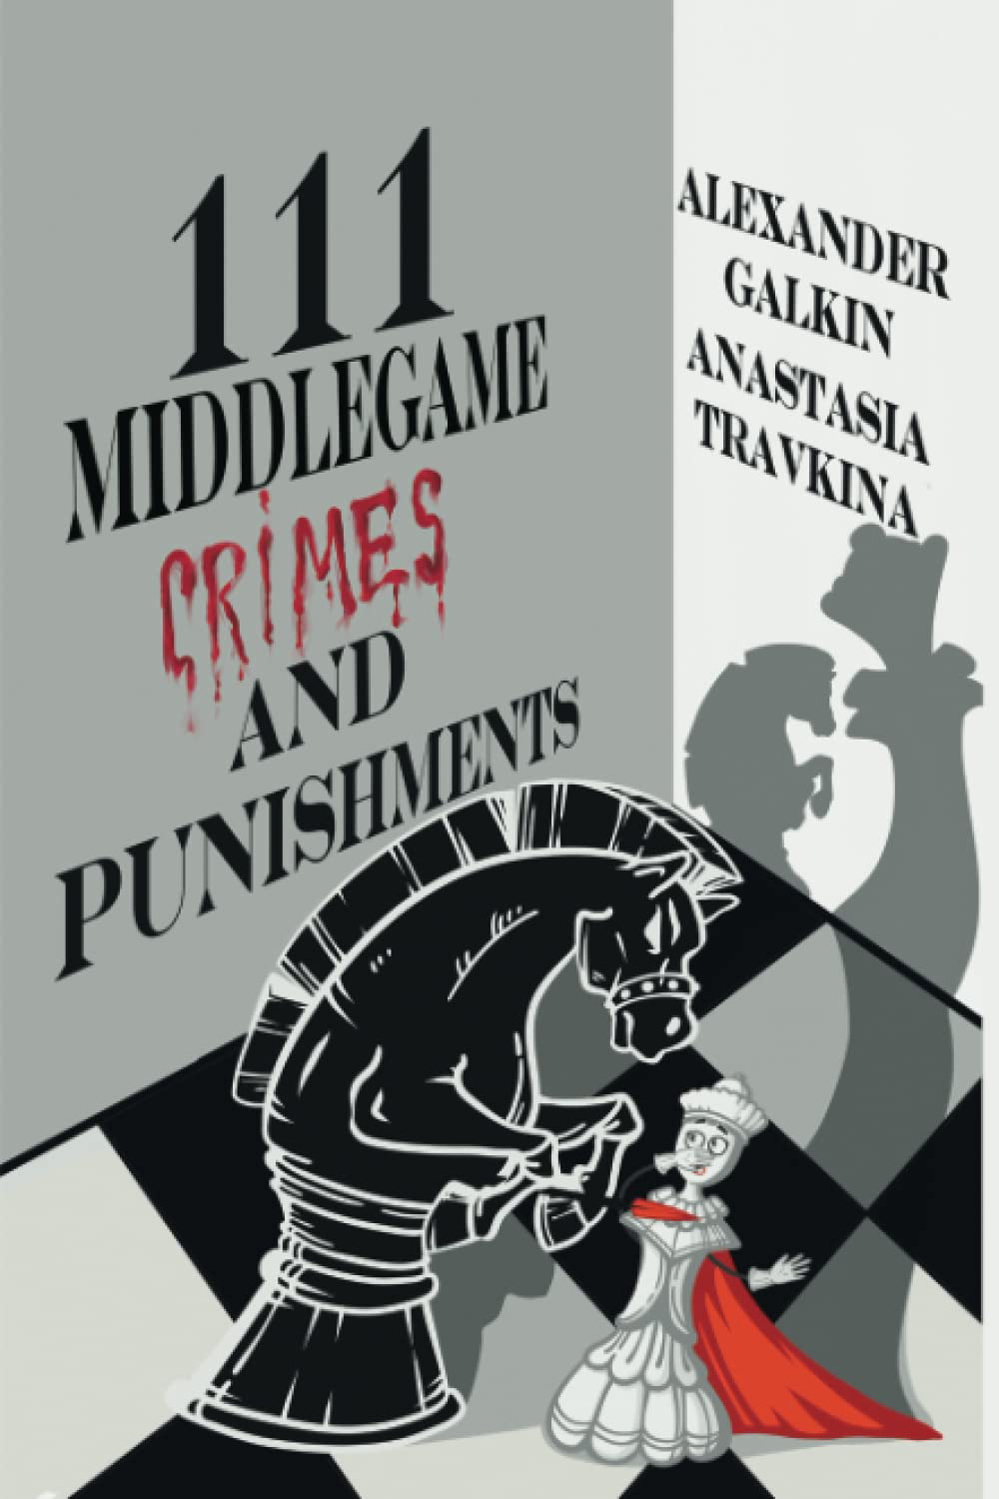 111 Middlegame  crimes and punishments. 9785604177099